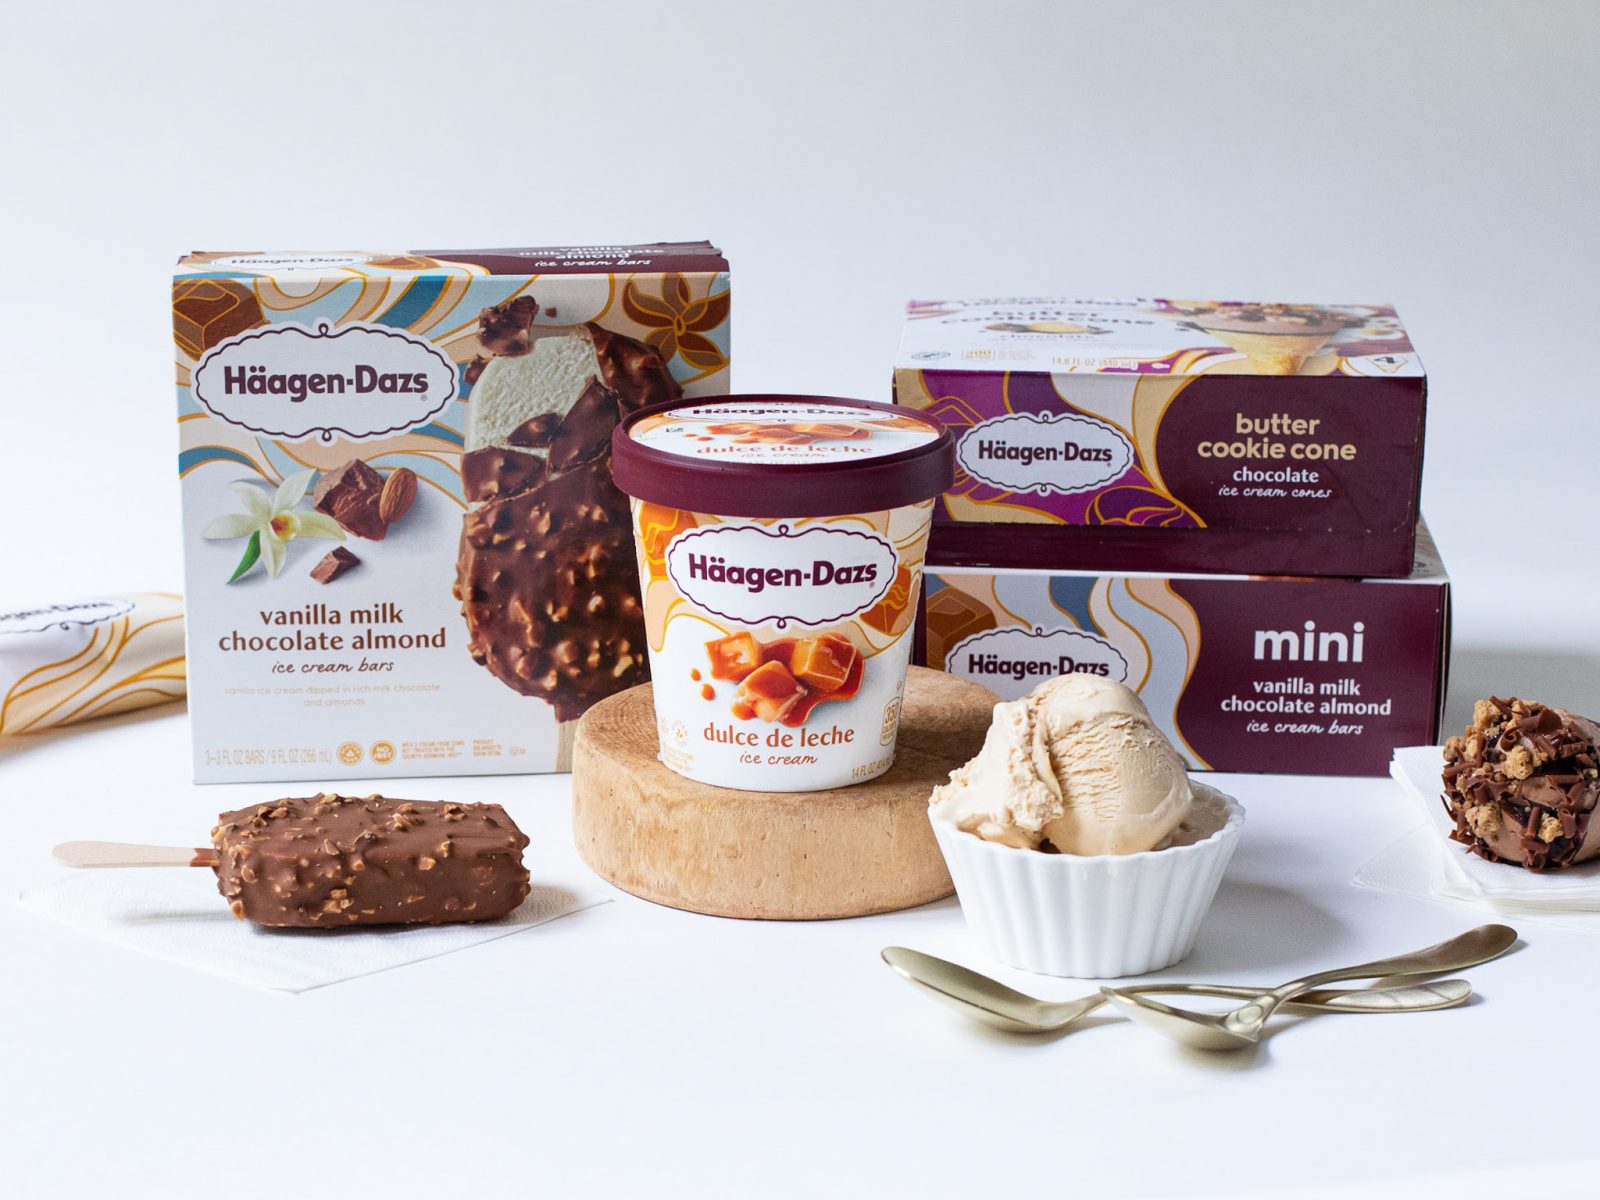 Get Haagen-Dazs Ice Cream For As Low As $2.25 At Kroger